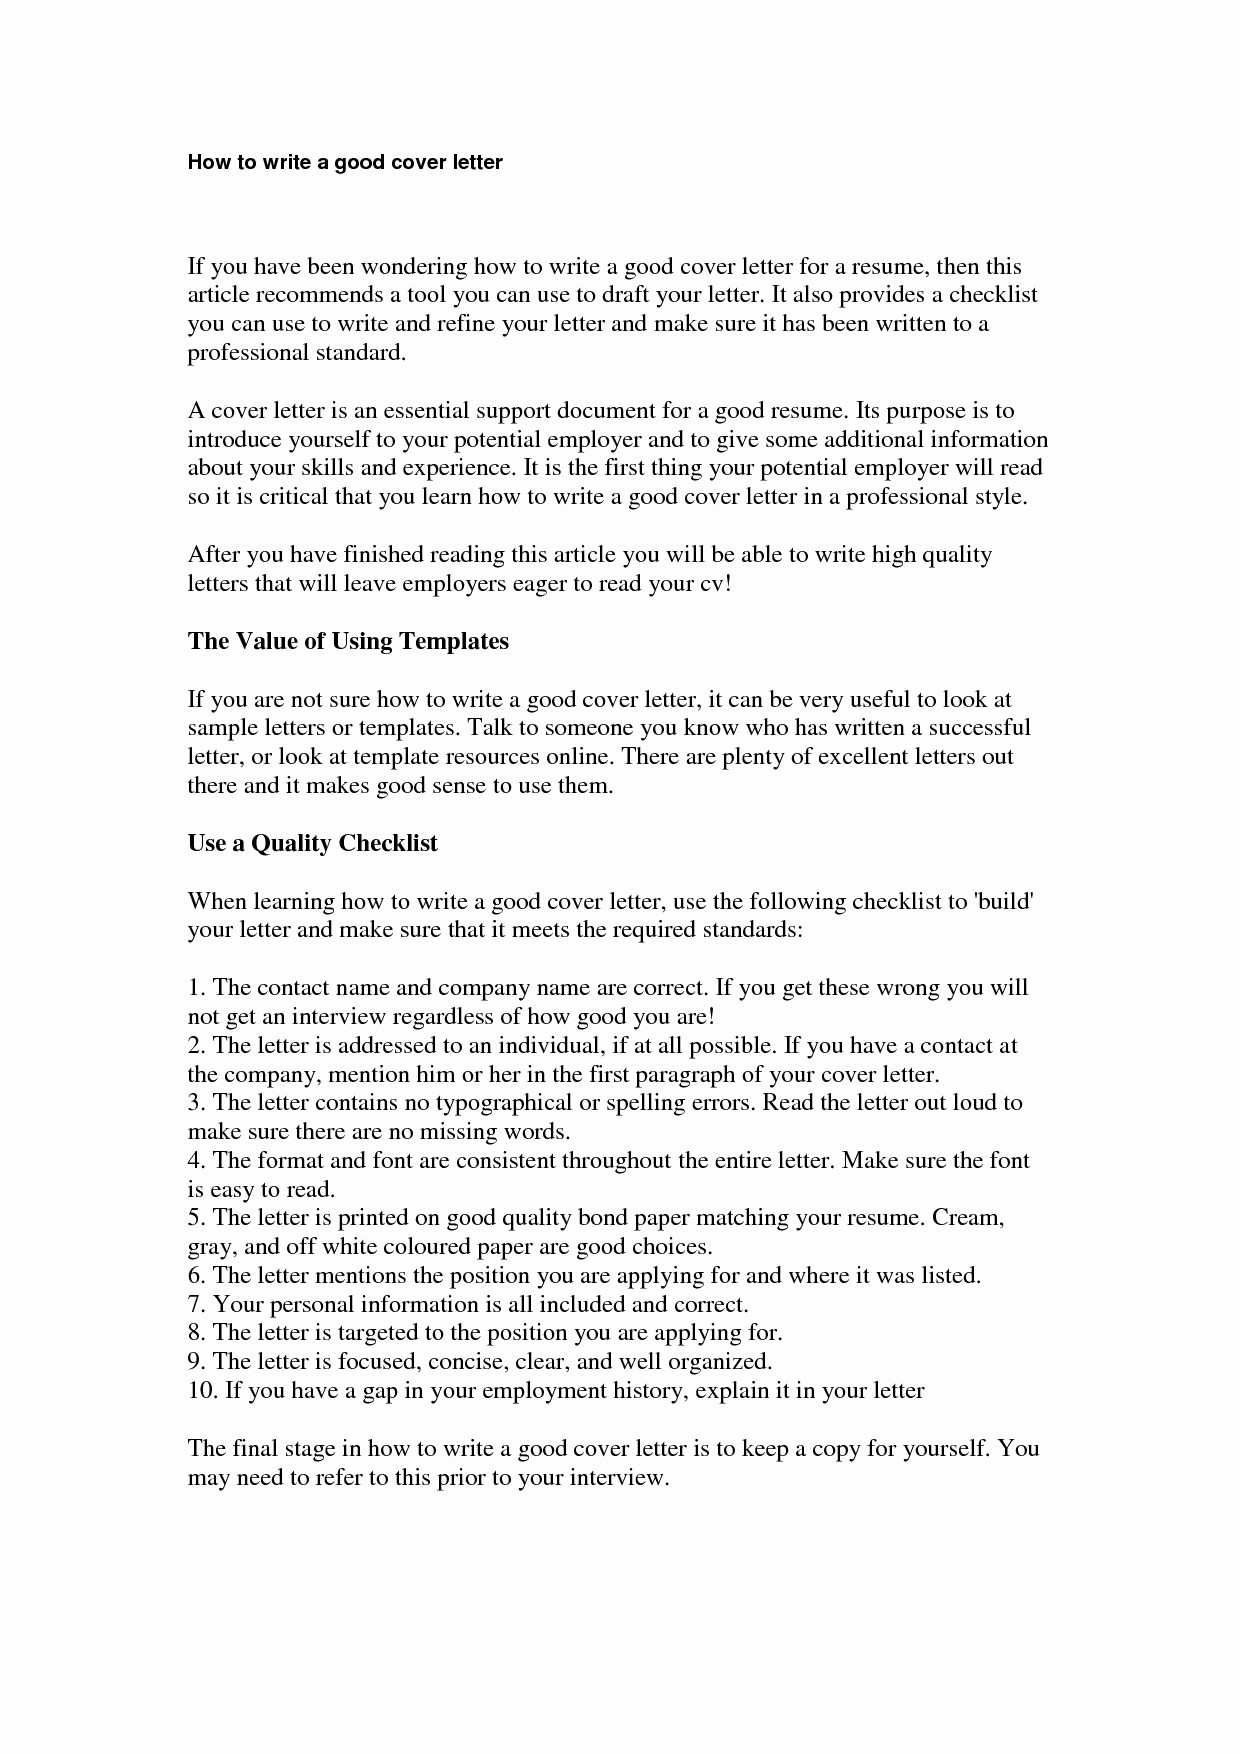 Professional Cover Letters for Resume New How to Write A Good Cover Letter